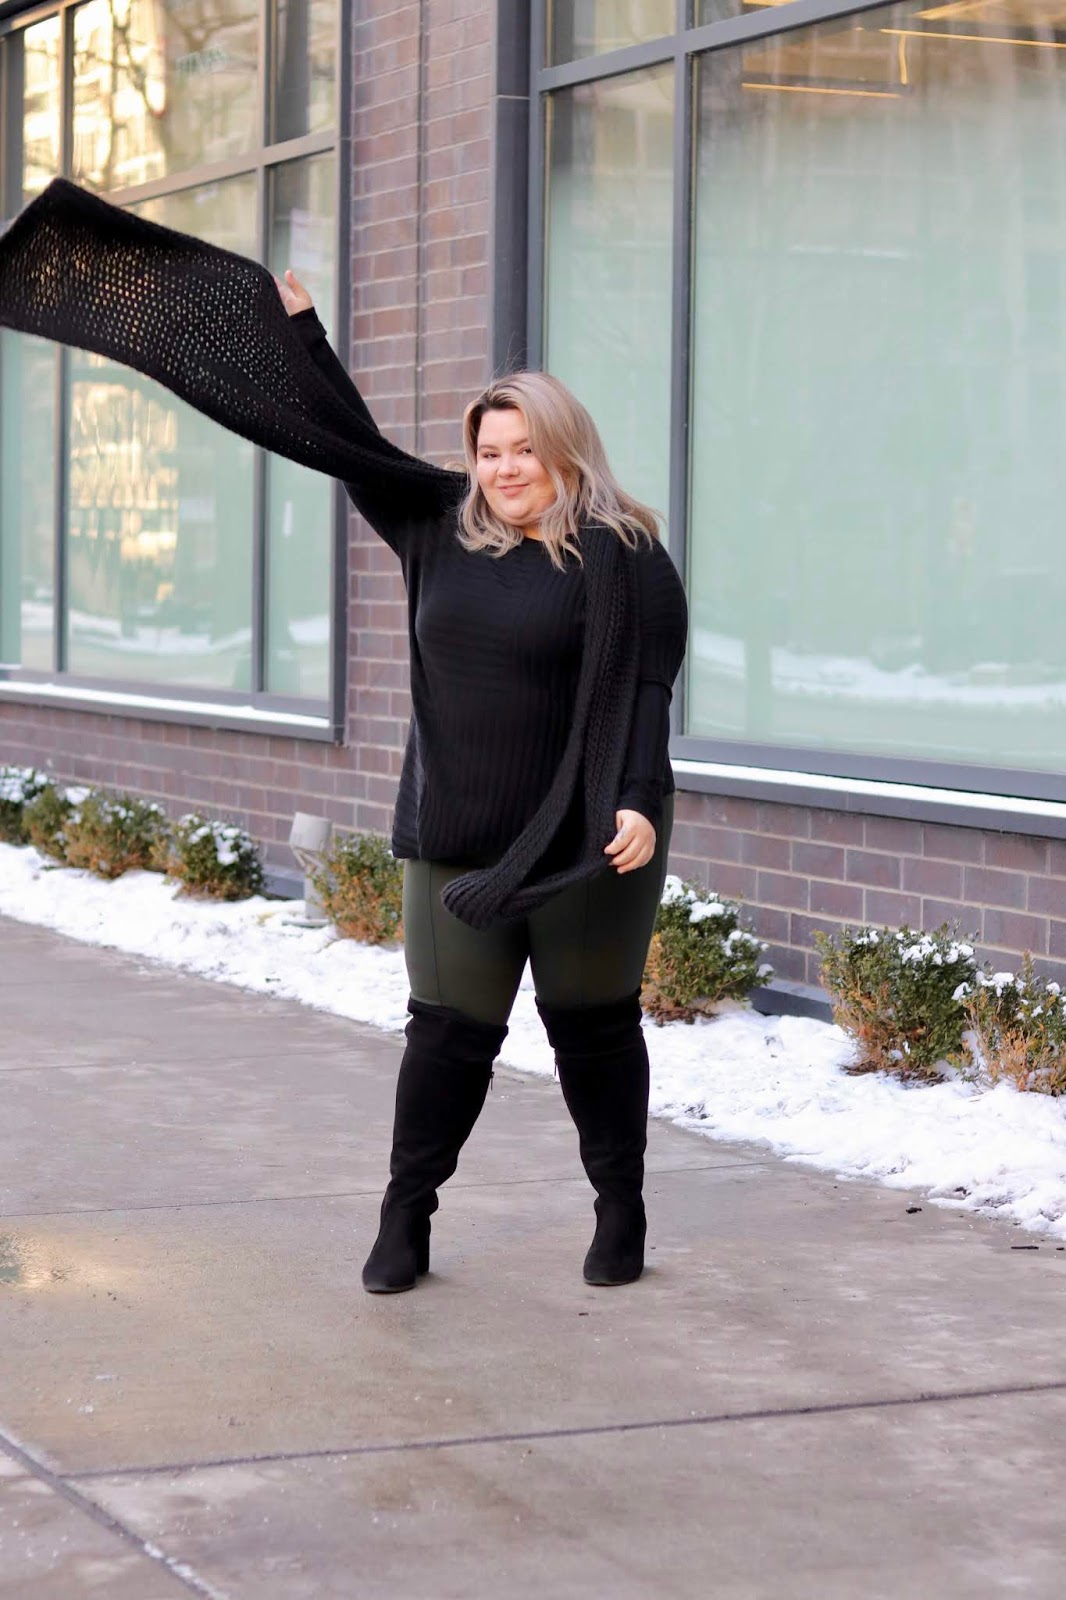 Chicago Plus Size Petite Fashion Blogger, YouTuber, and model Natalie Craig, of Natalie in the City, buys a whole wardrobe for under $200 at Gordmans, including active wear, work wear, casual looks, and sexy dresses for a night out on the town.